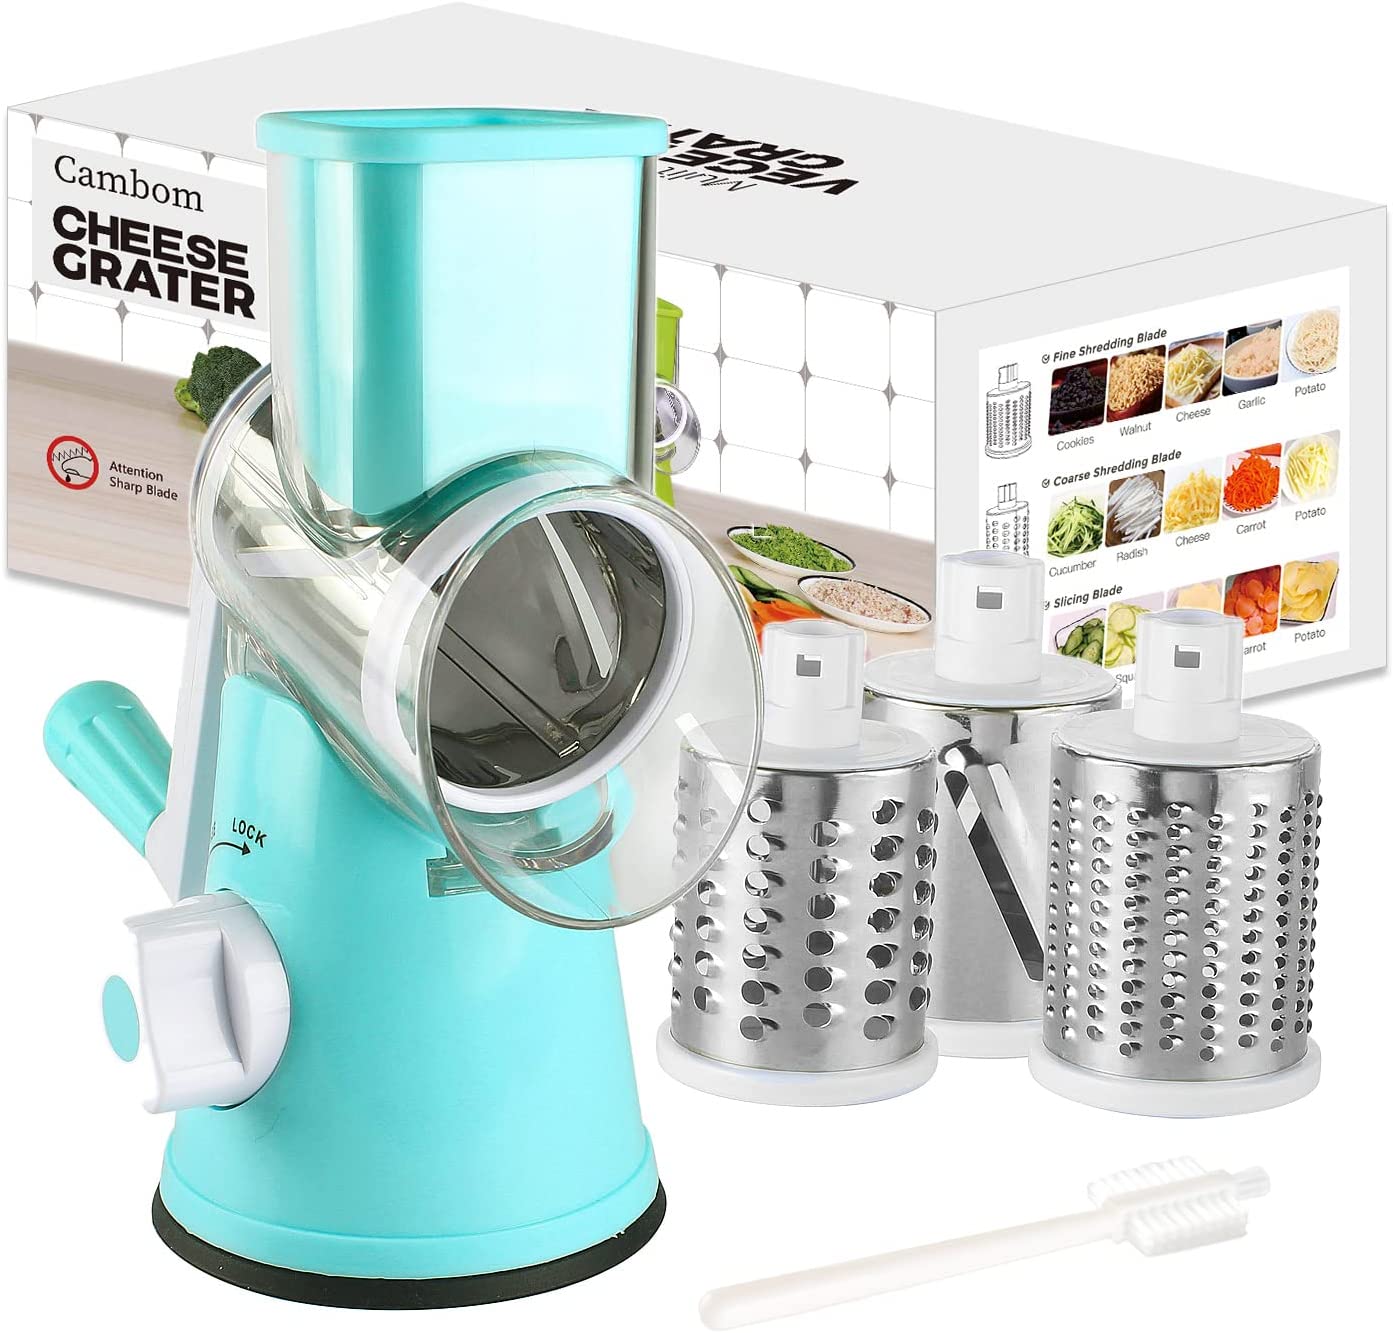 Zulay Kitchen Professional Stainless Steel Flat Handheld Cheese Grater - Green